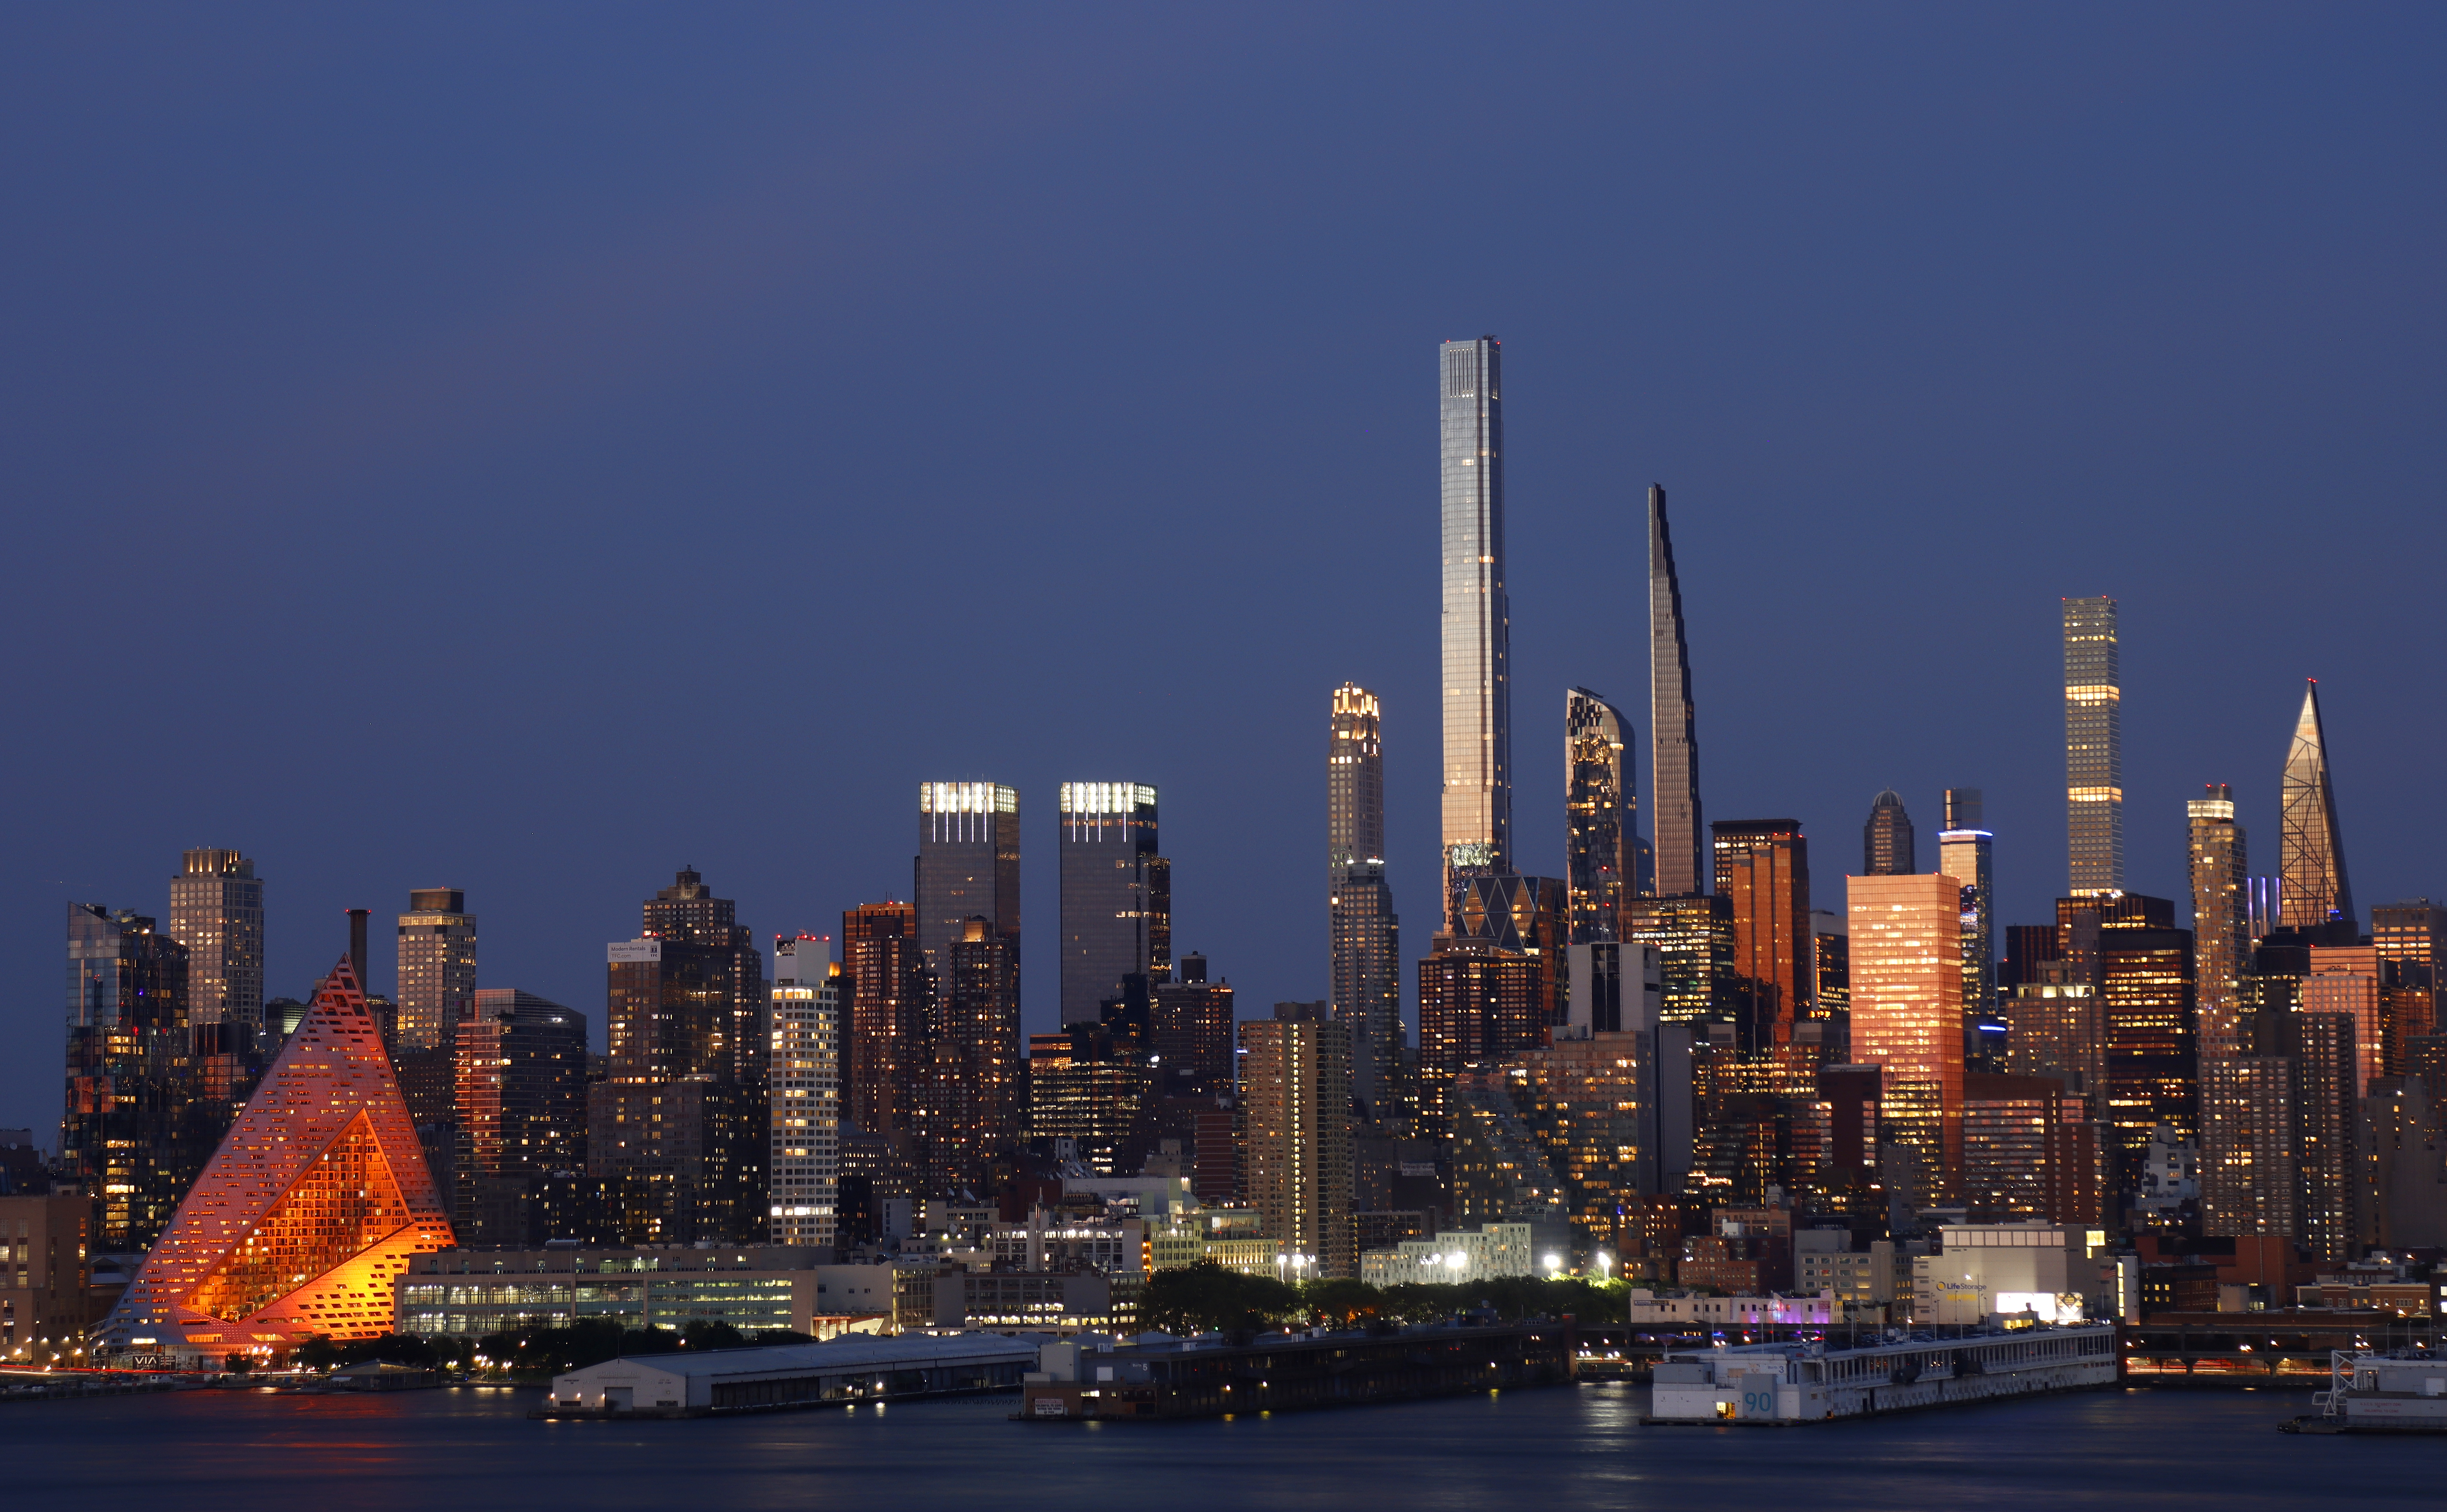 An Architects' Guide to the New York City Skyline InsideHook